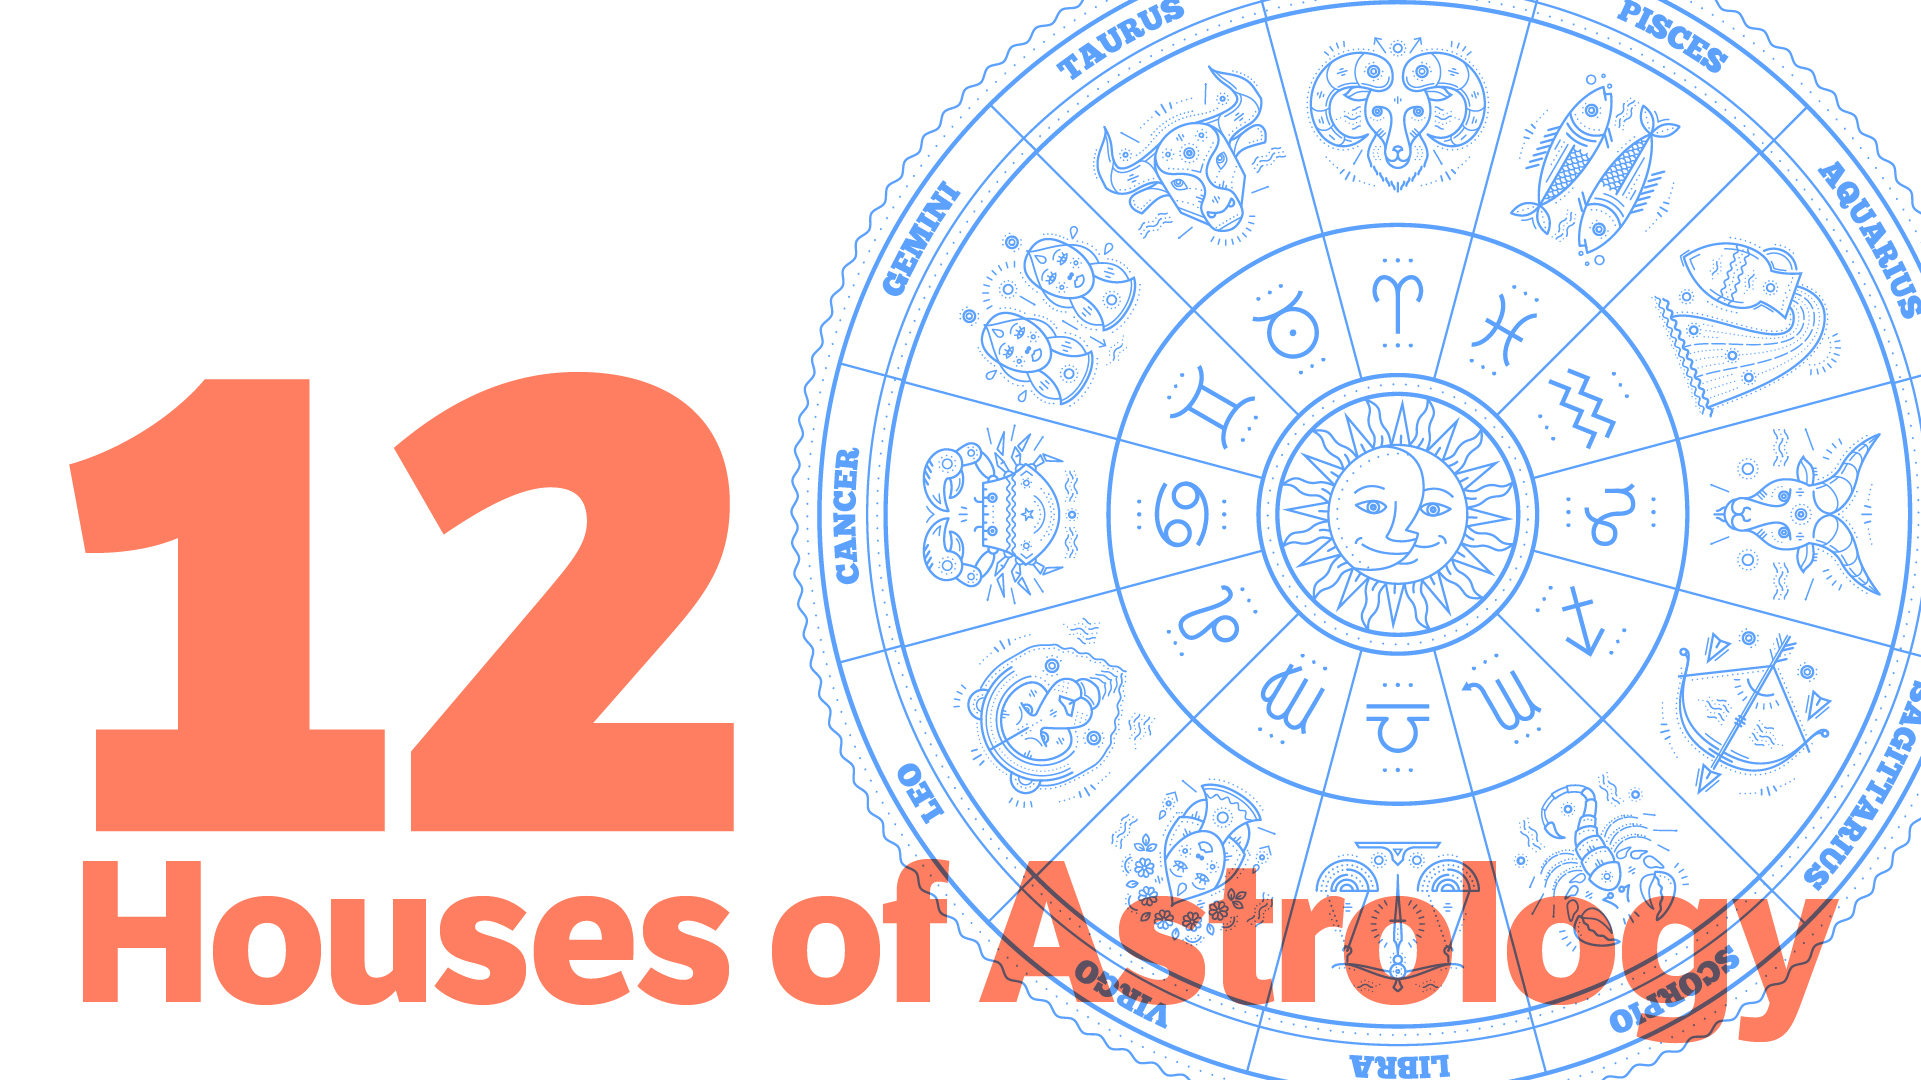 Astrology: Finding Meaning in the Stars